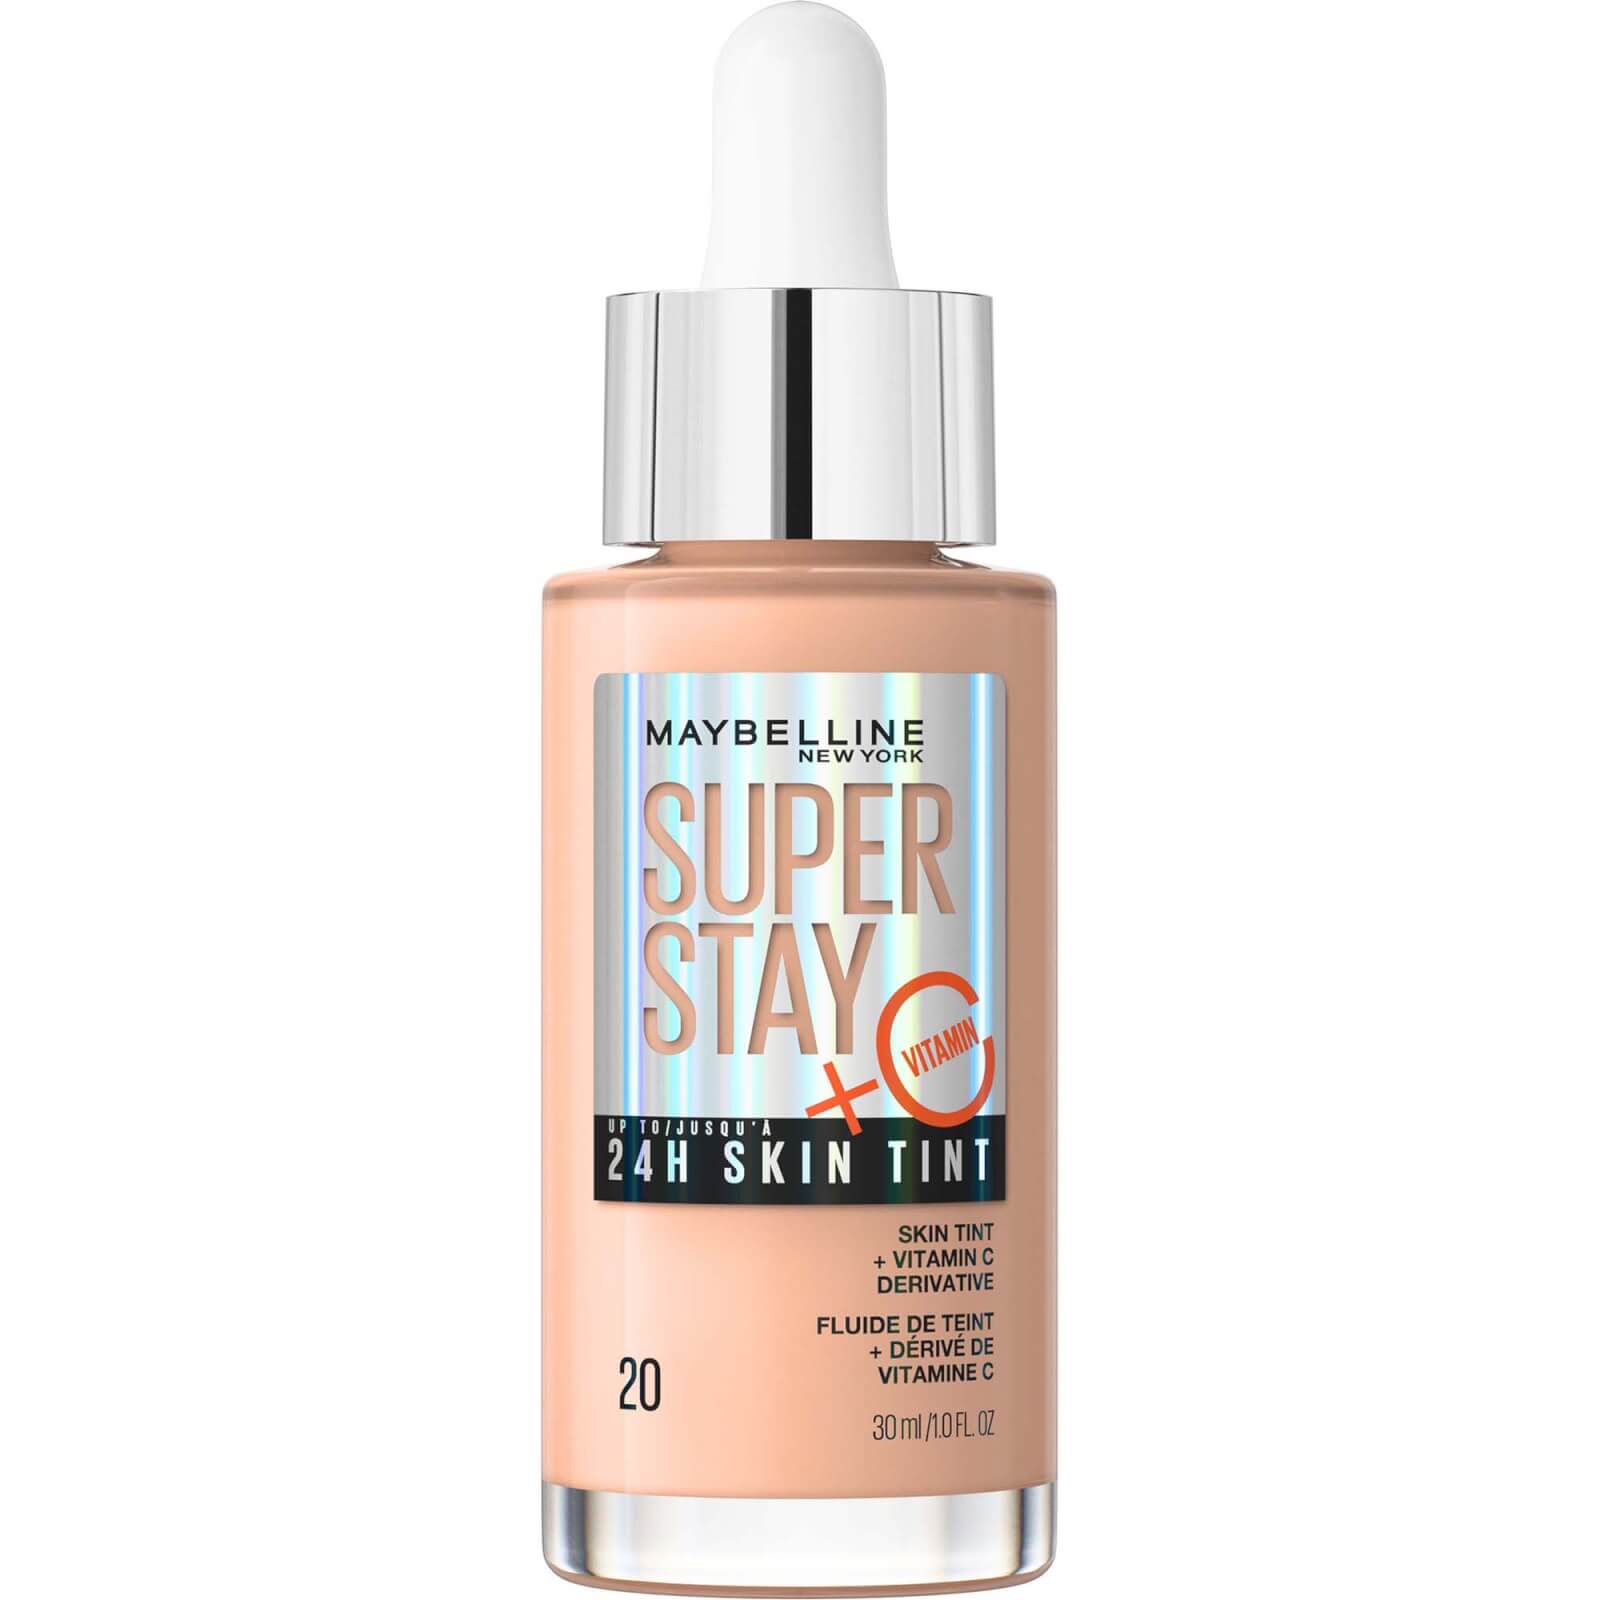 maybelline super stay up to 24h skin tint foundation + vitamin c 30ml (various shades) - 20